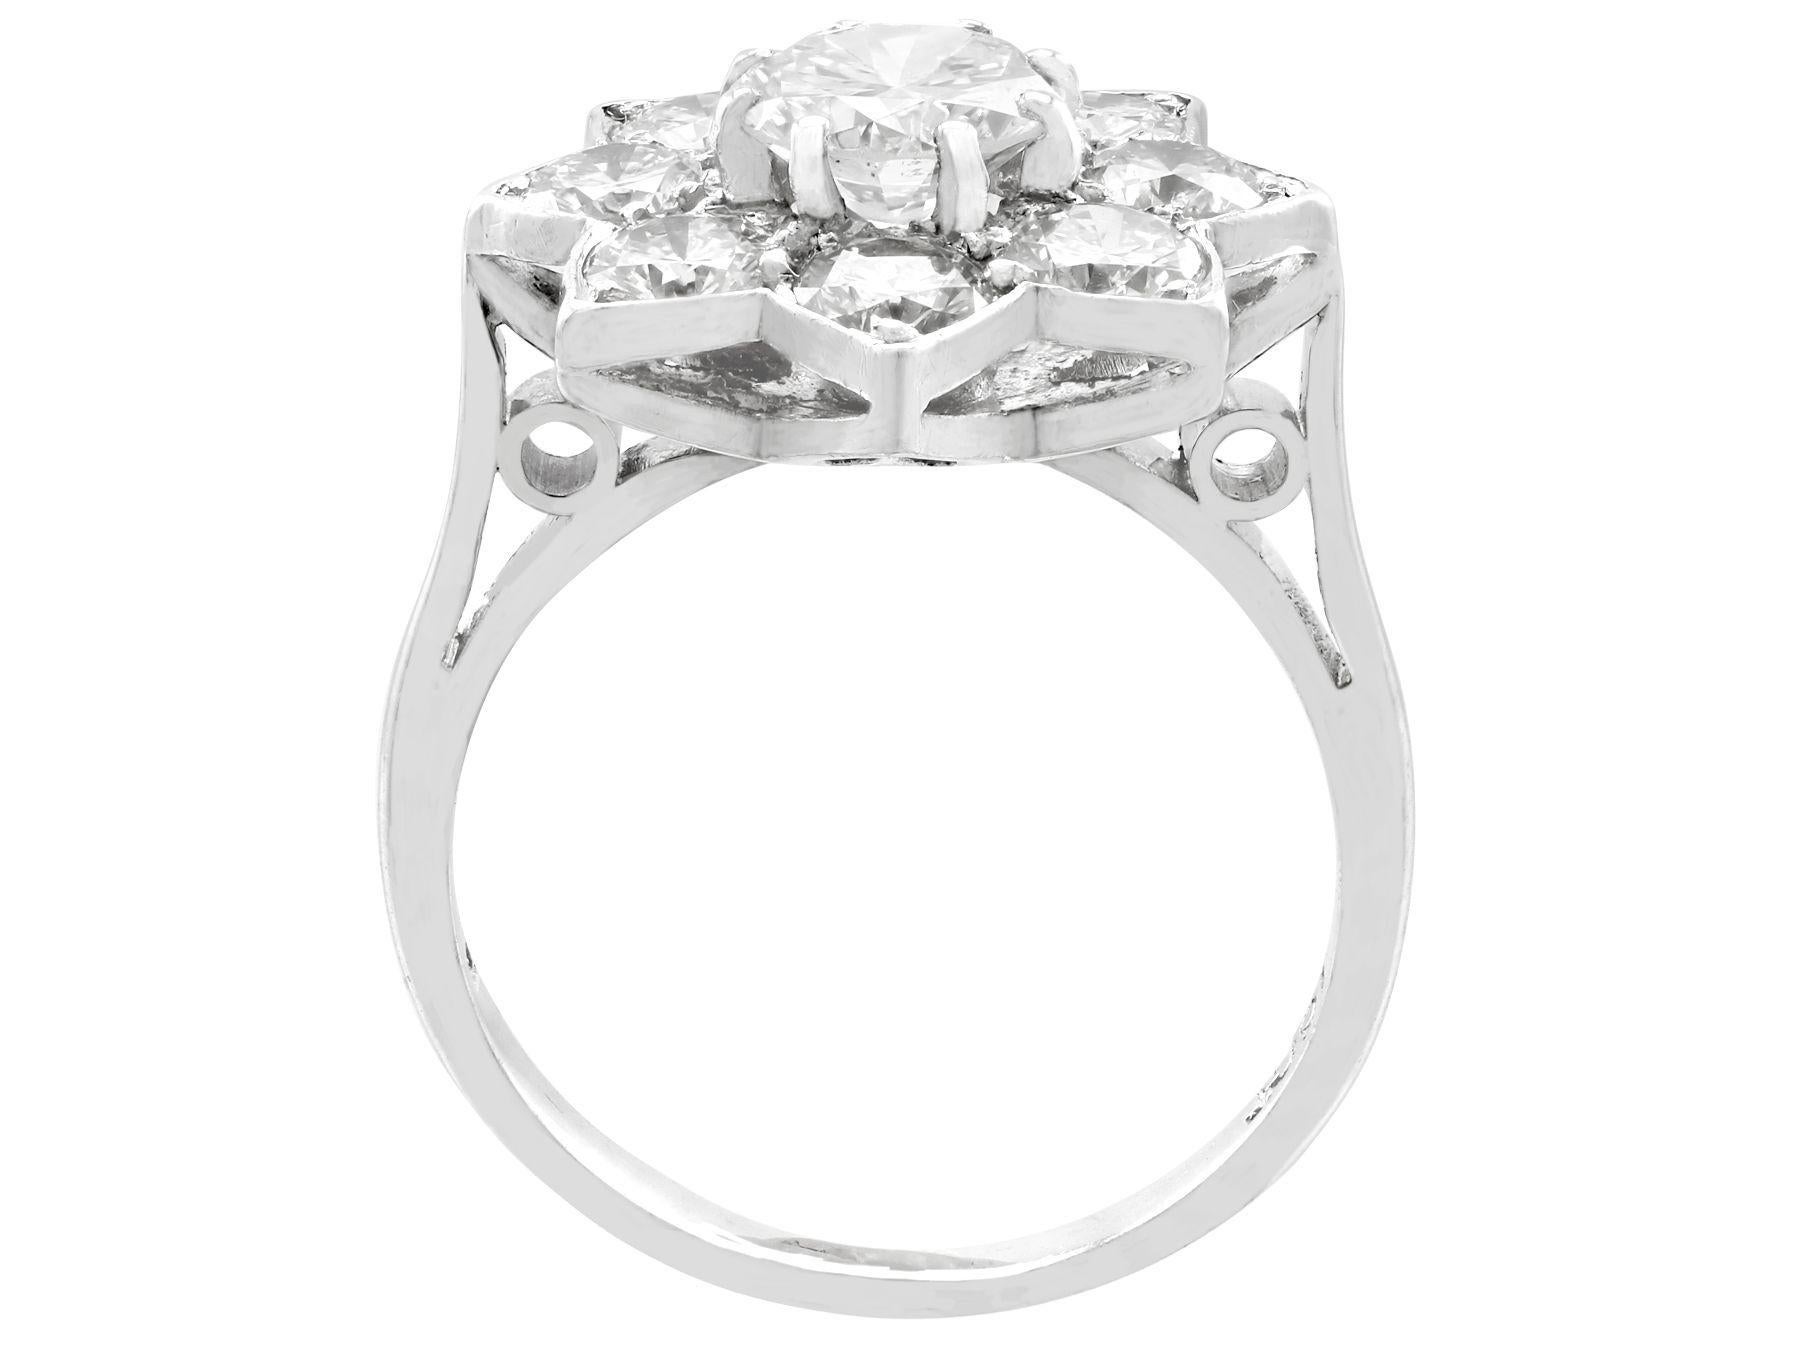 Women's 1940s 1.87 Carat Diamond and White Gold Cluster Ring For Sale